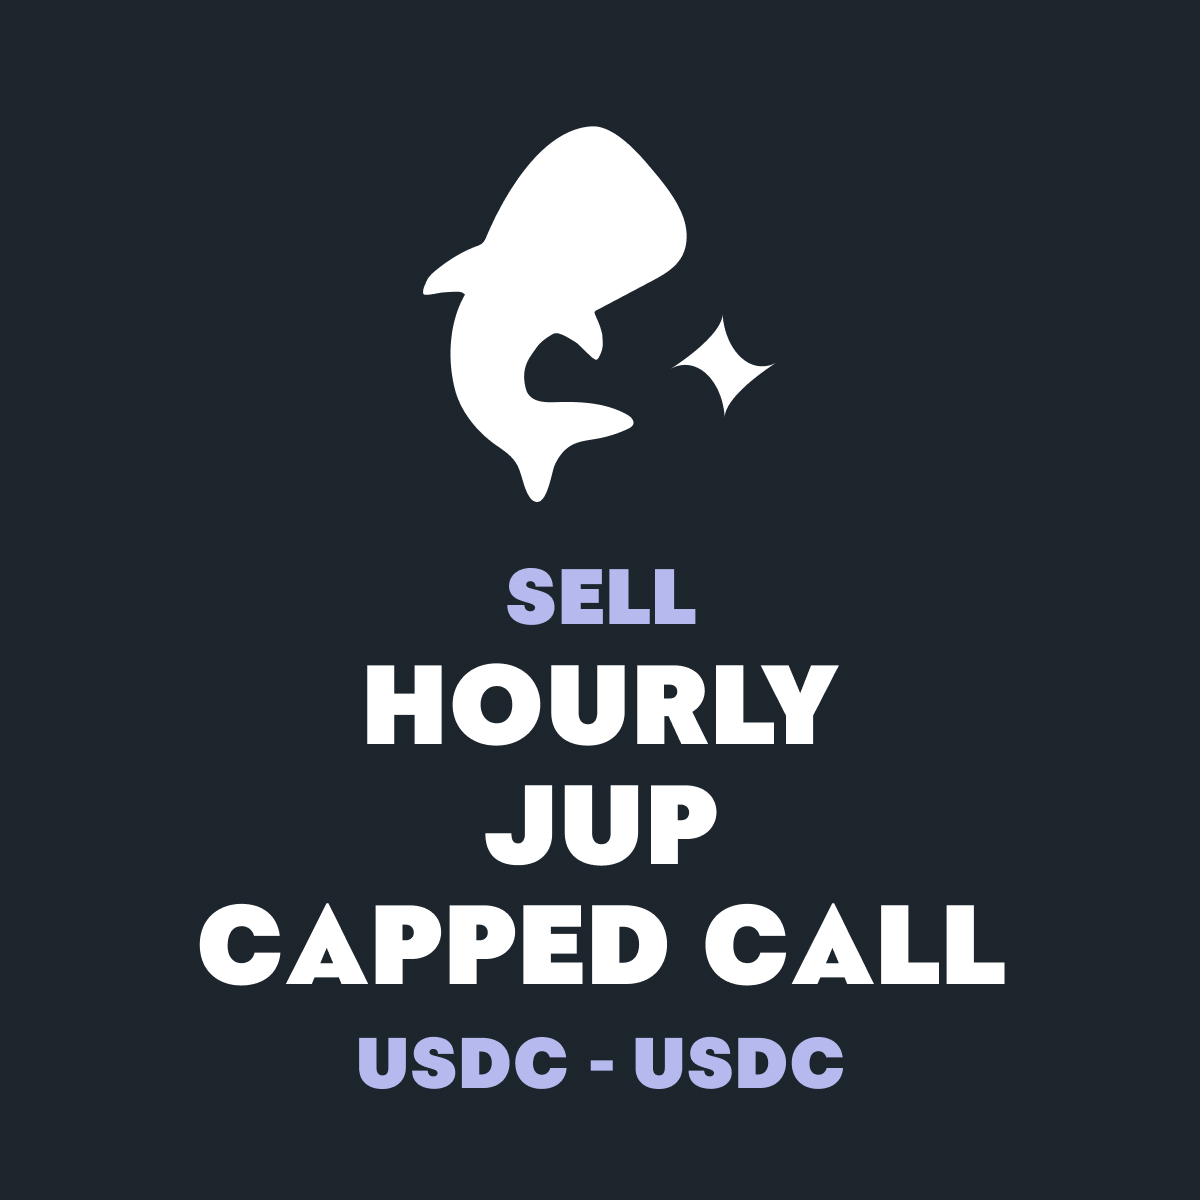 Typus Deposit Receipt | JUP-Hourly-UsdcCappedCall